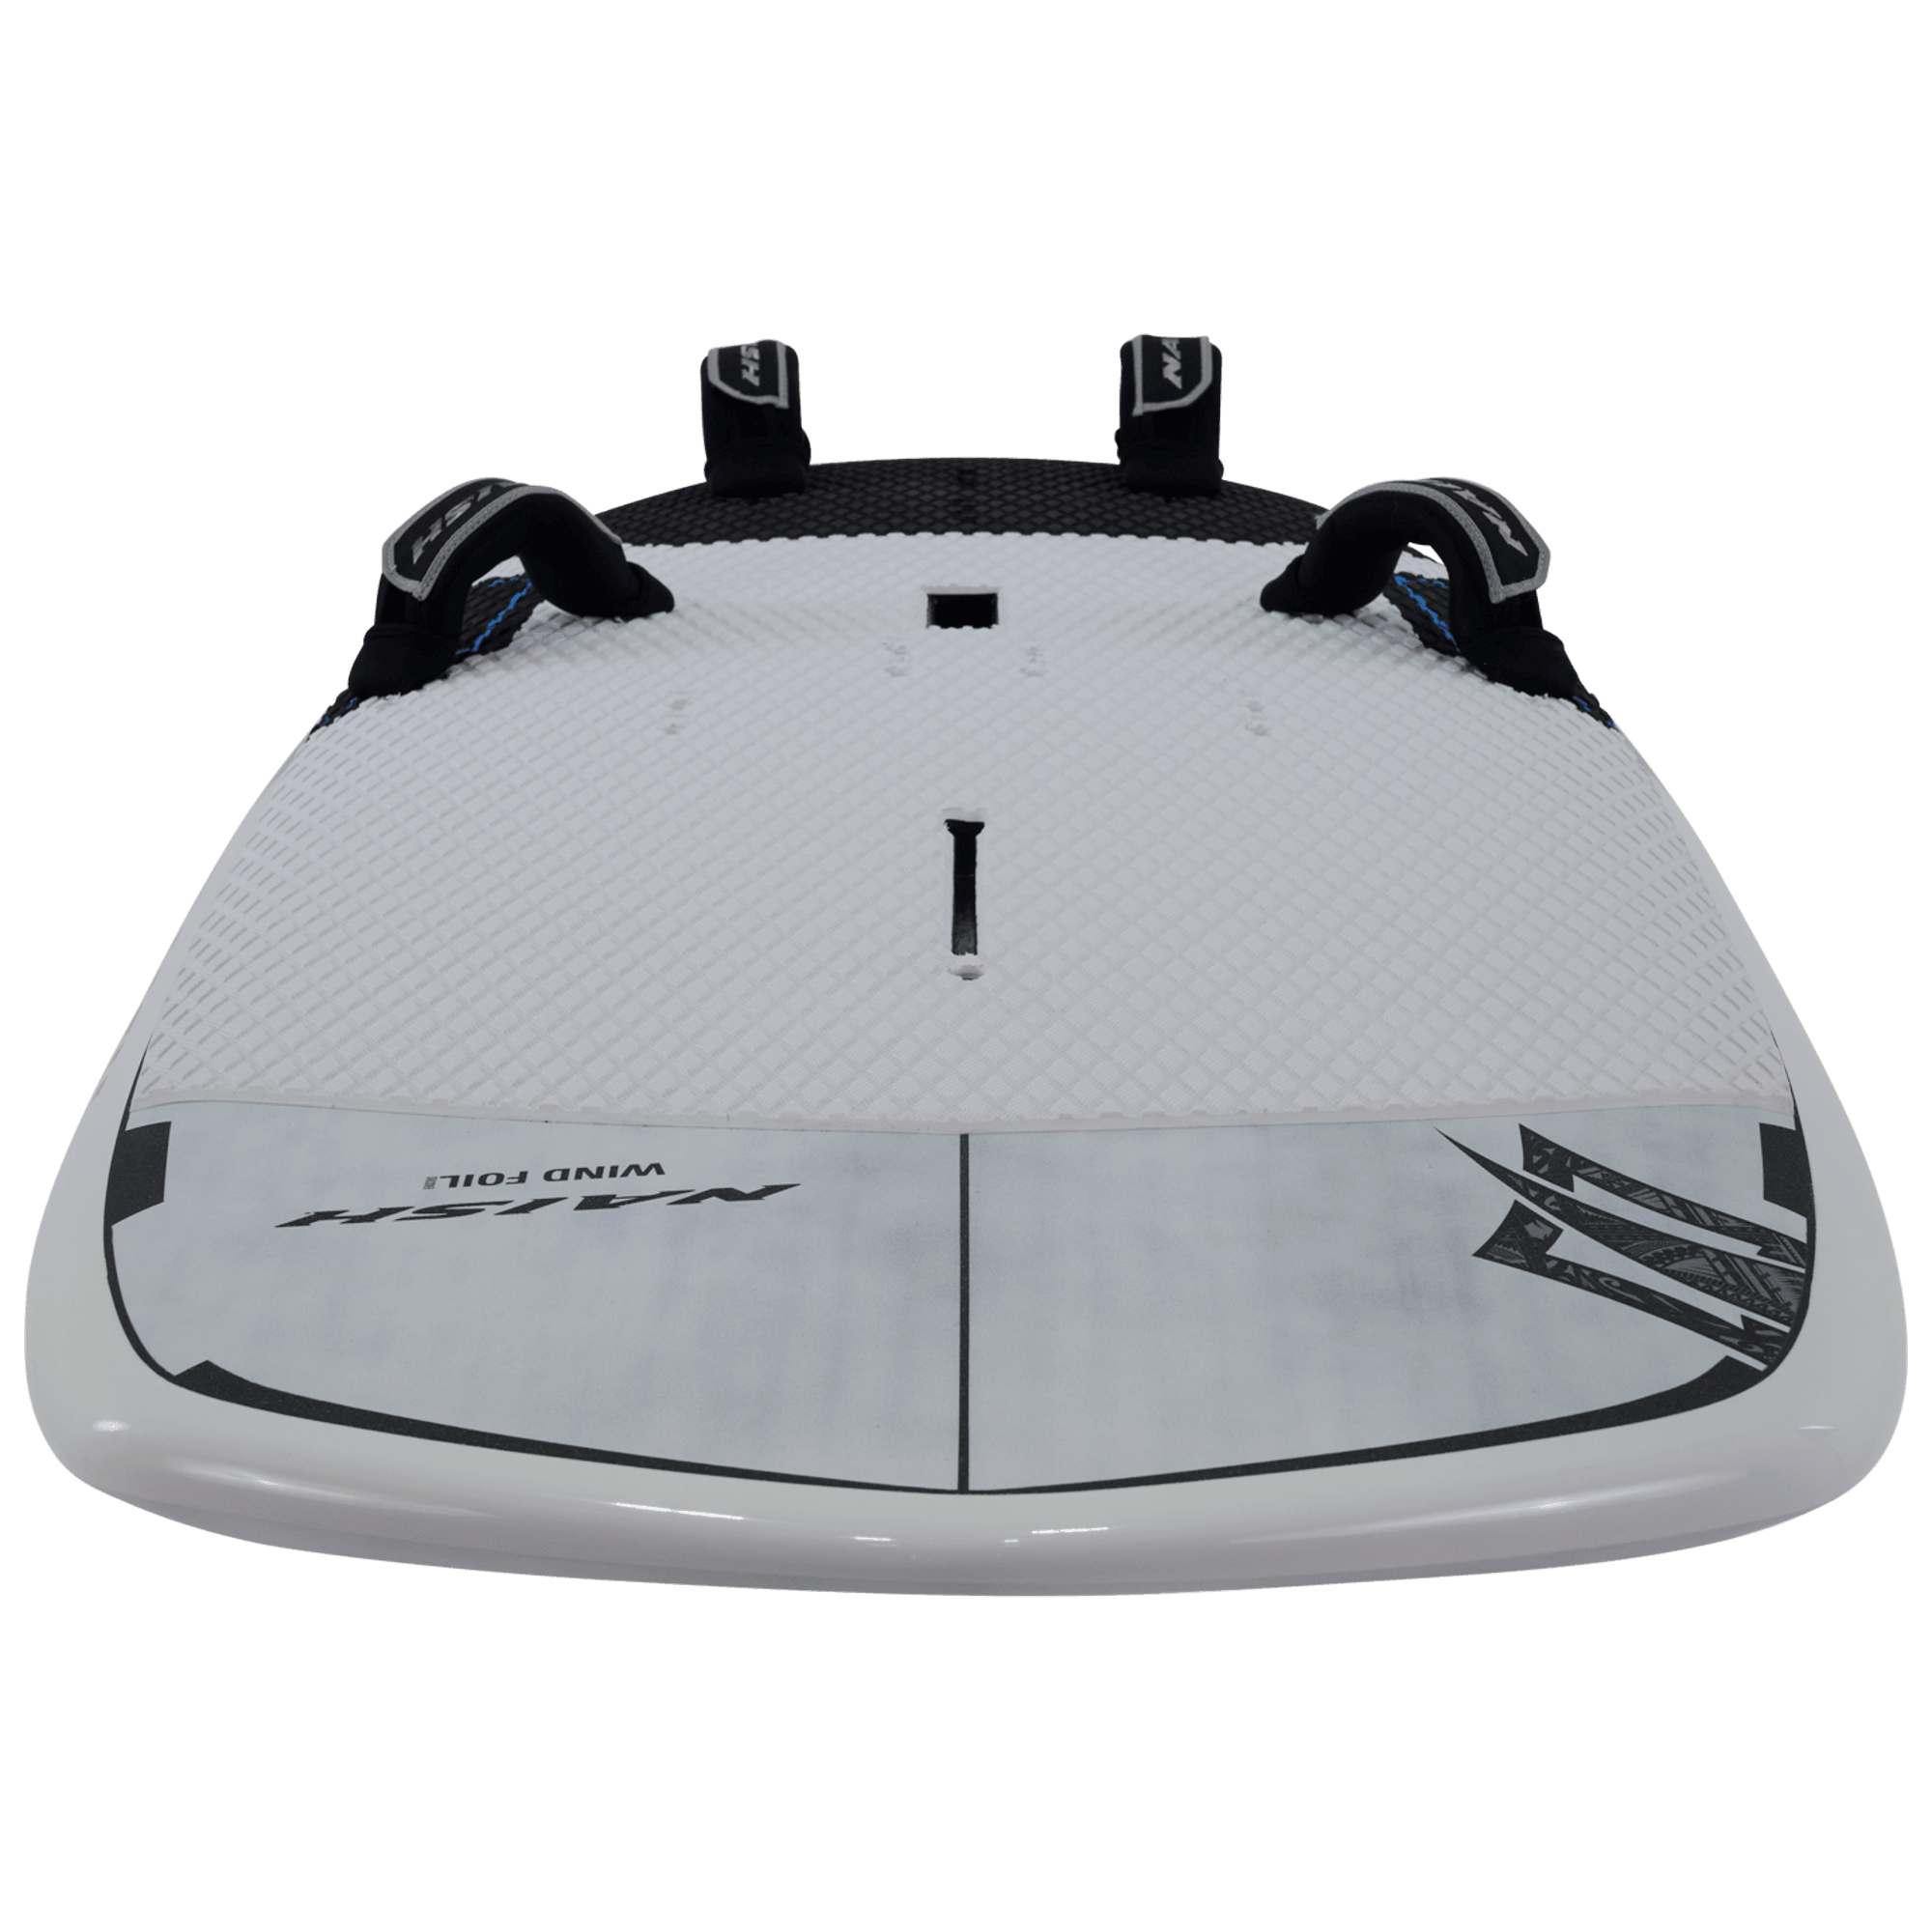 2024 Hover Wind Foil Crossover - Naish.com